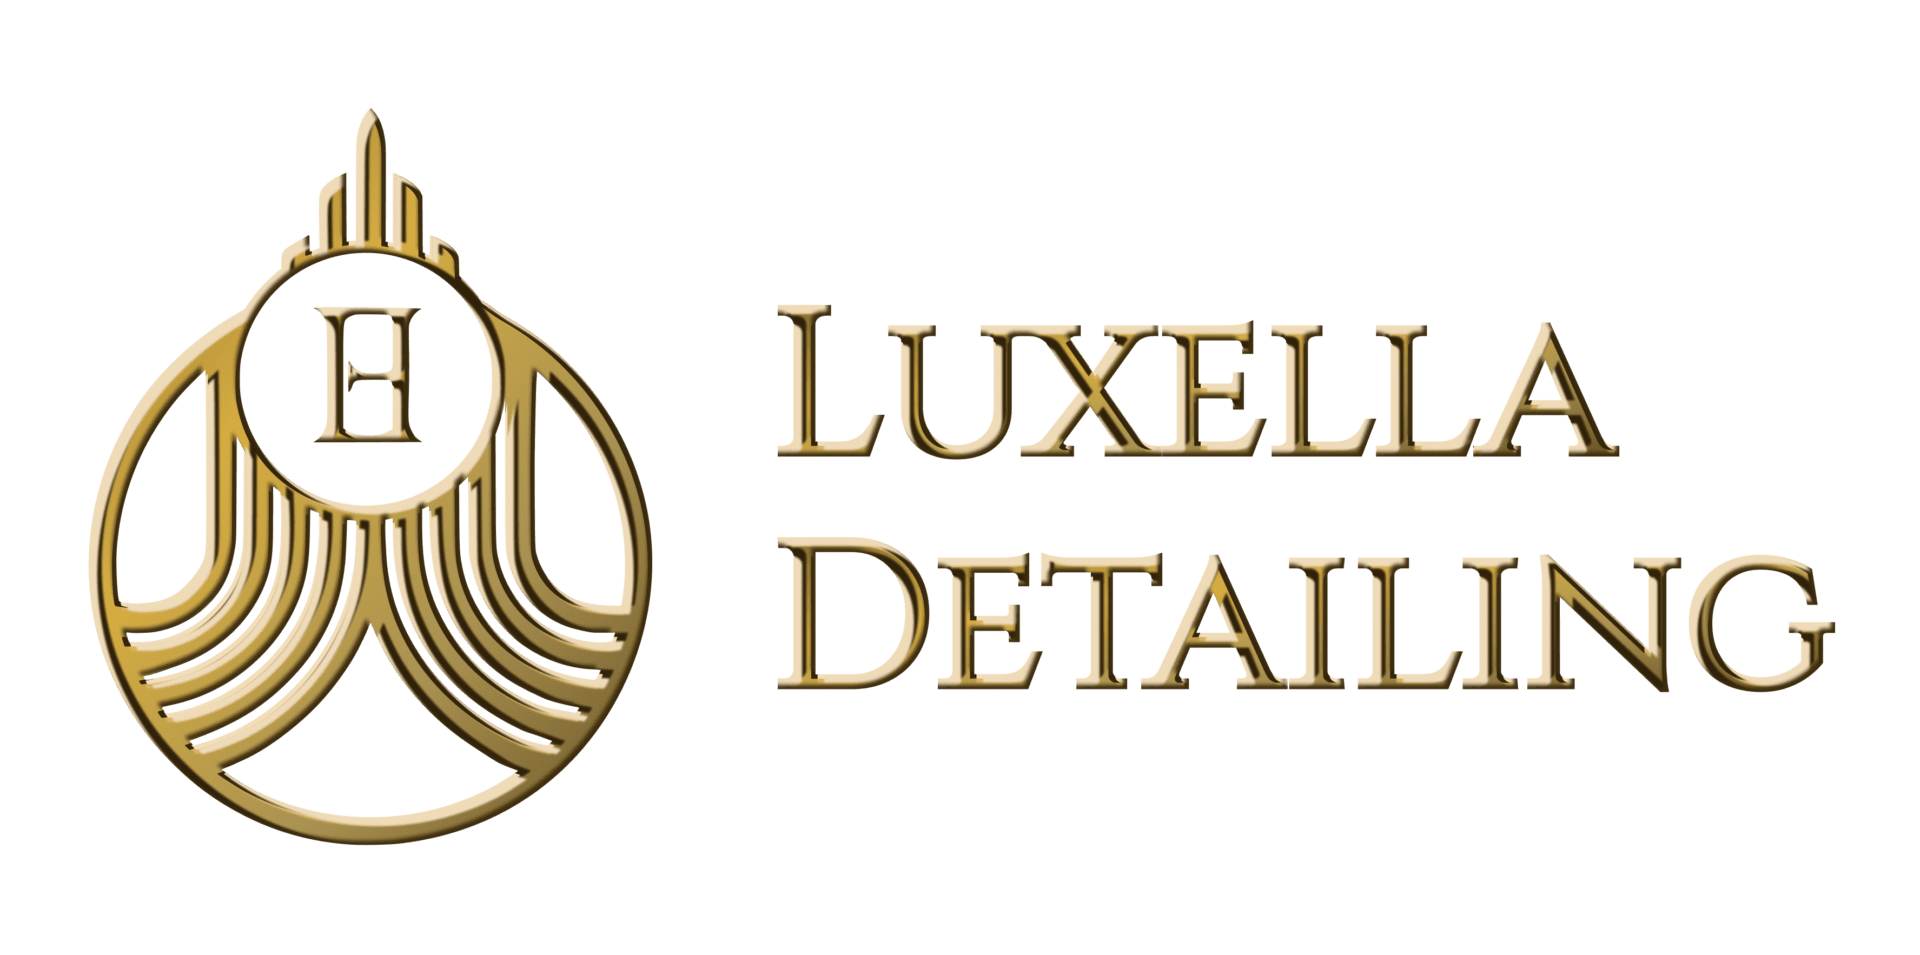 A gold logo that says luxello detailing